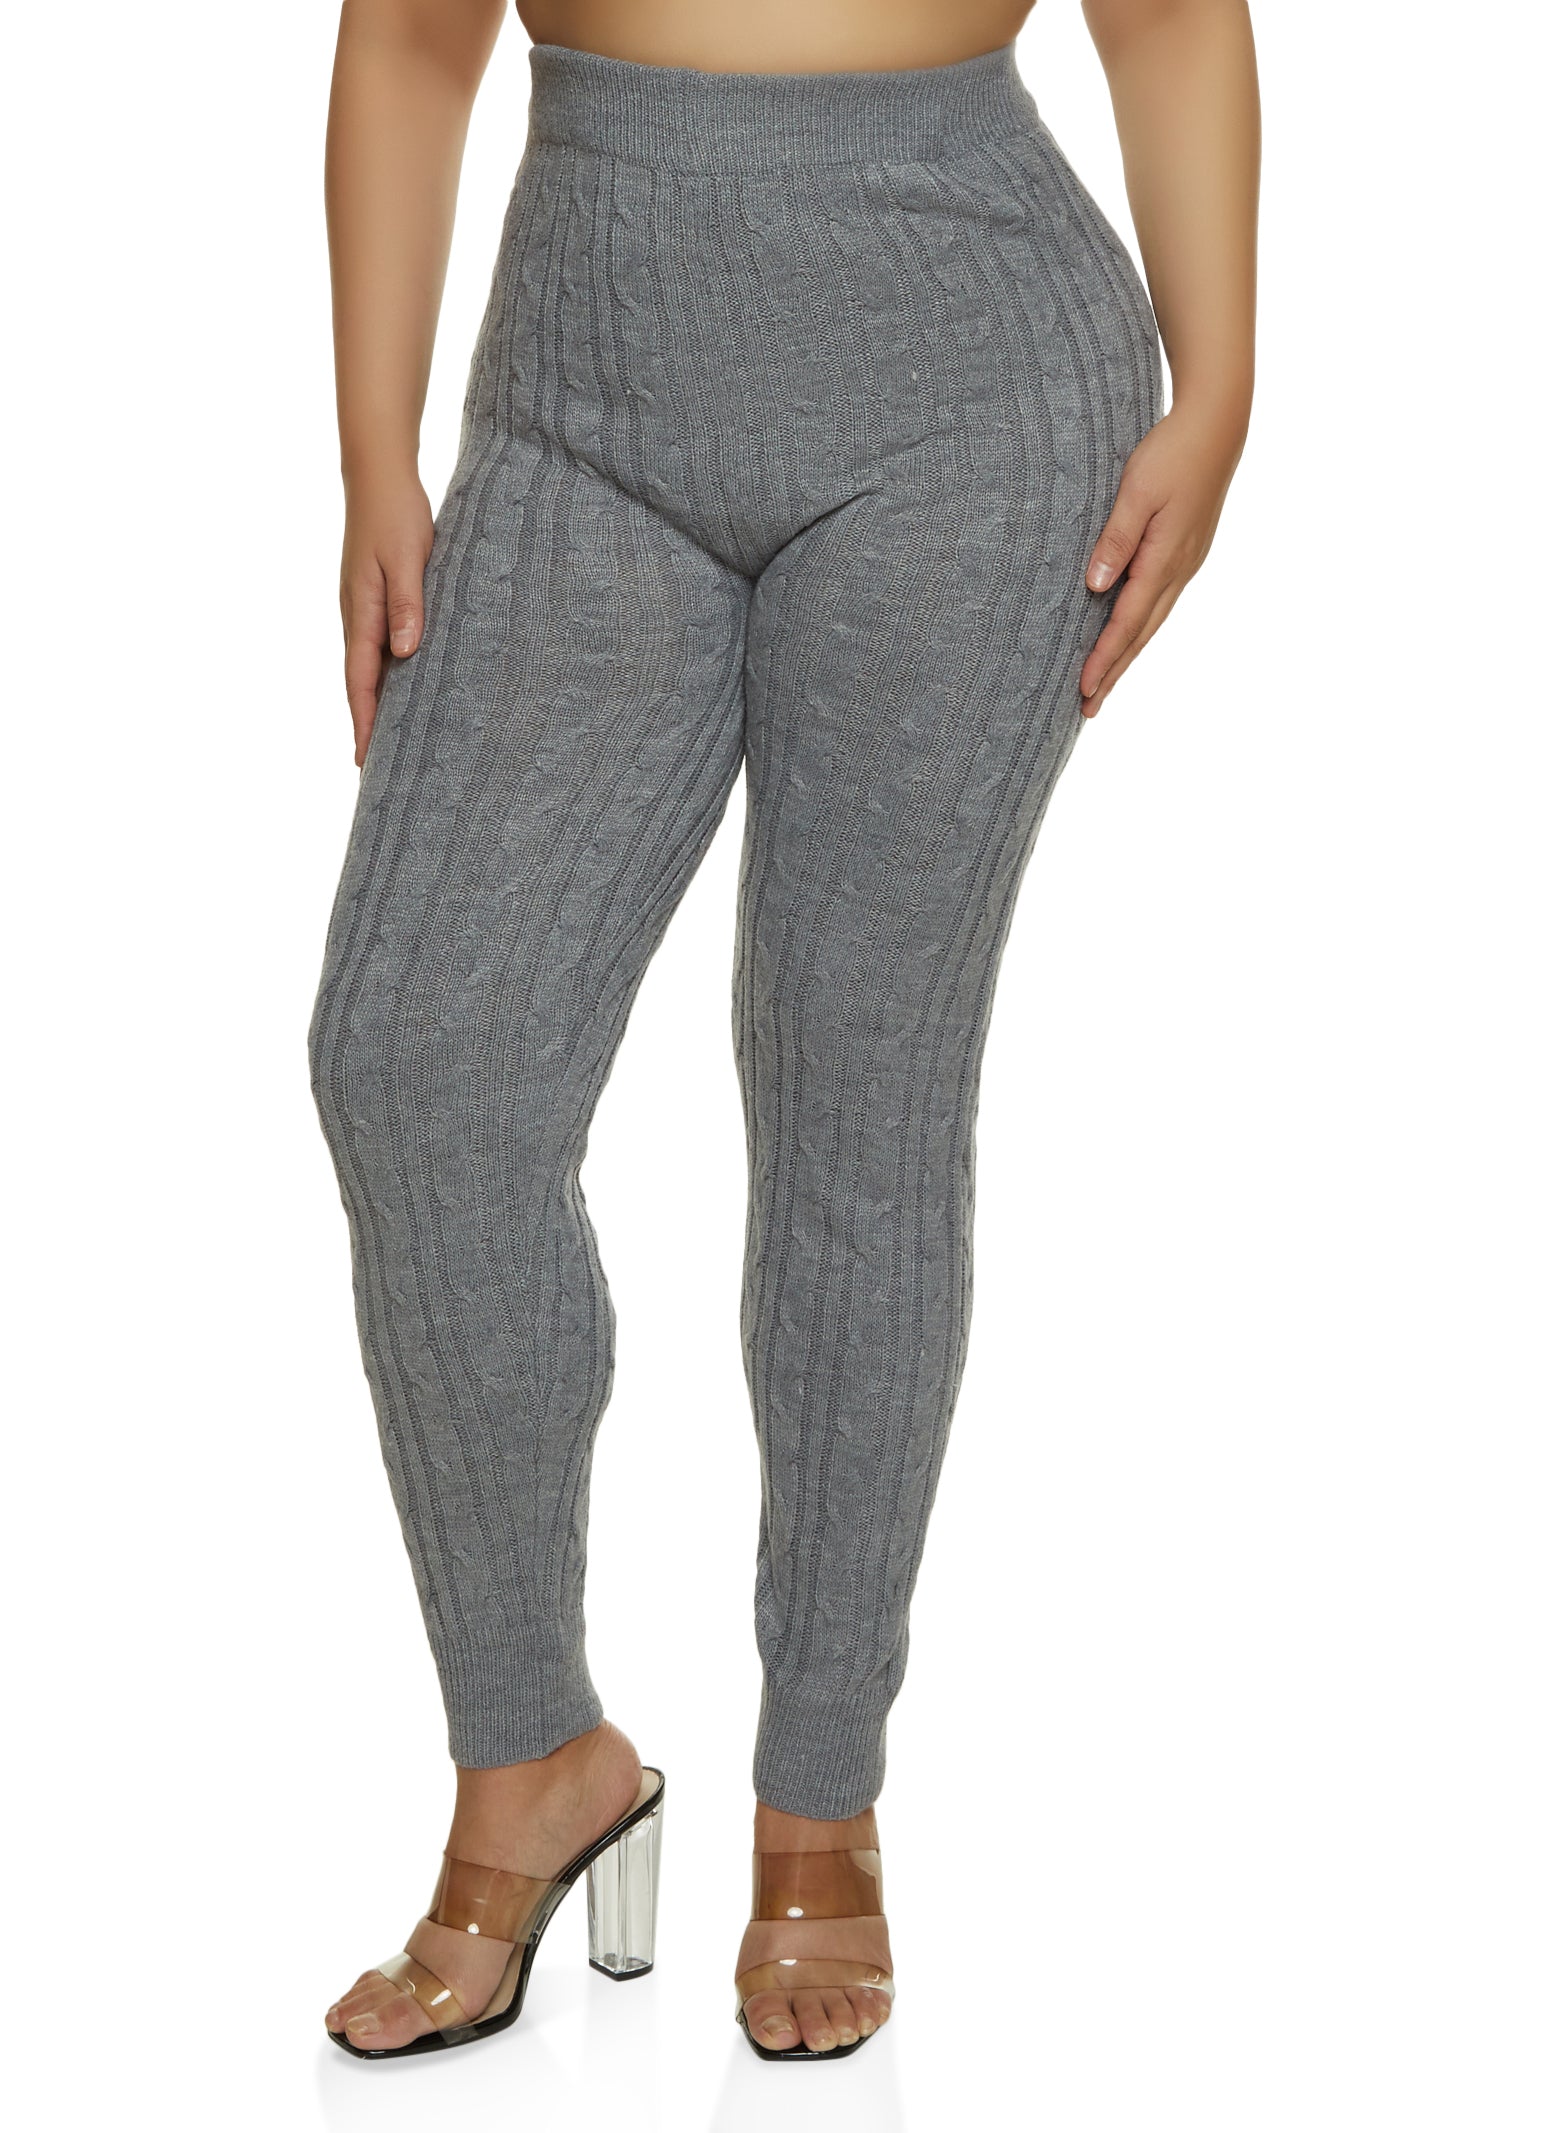 Womens Plus Size Cable Knit Skinny Pants, Grey, Size 3X